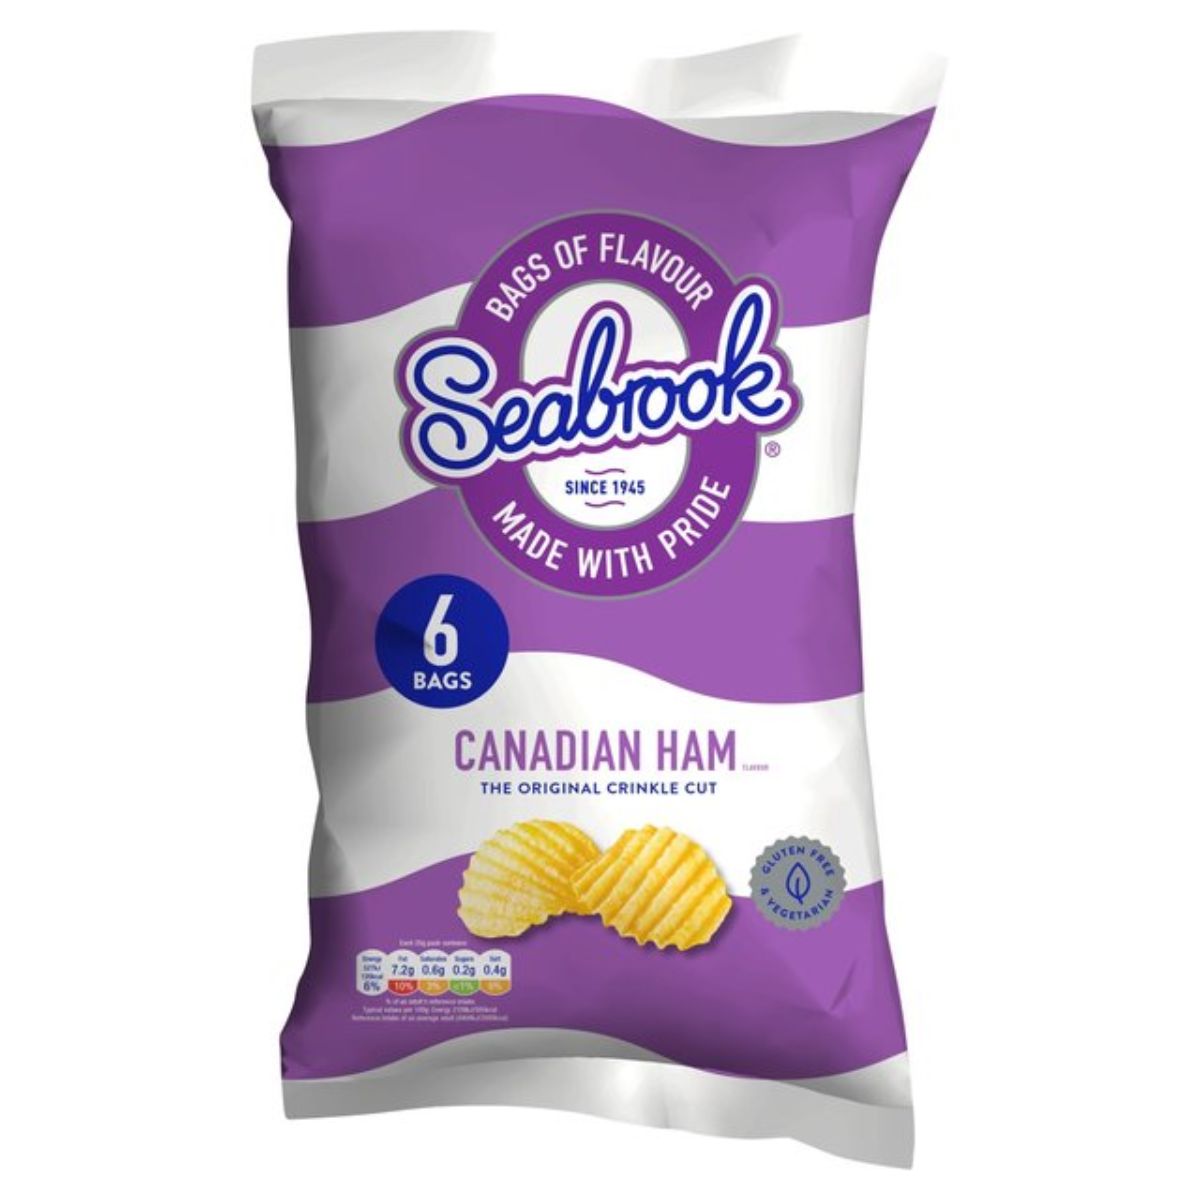 A 6 pack of seabrook canadian ham chips.